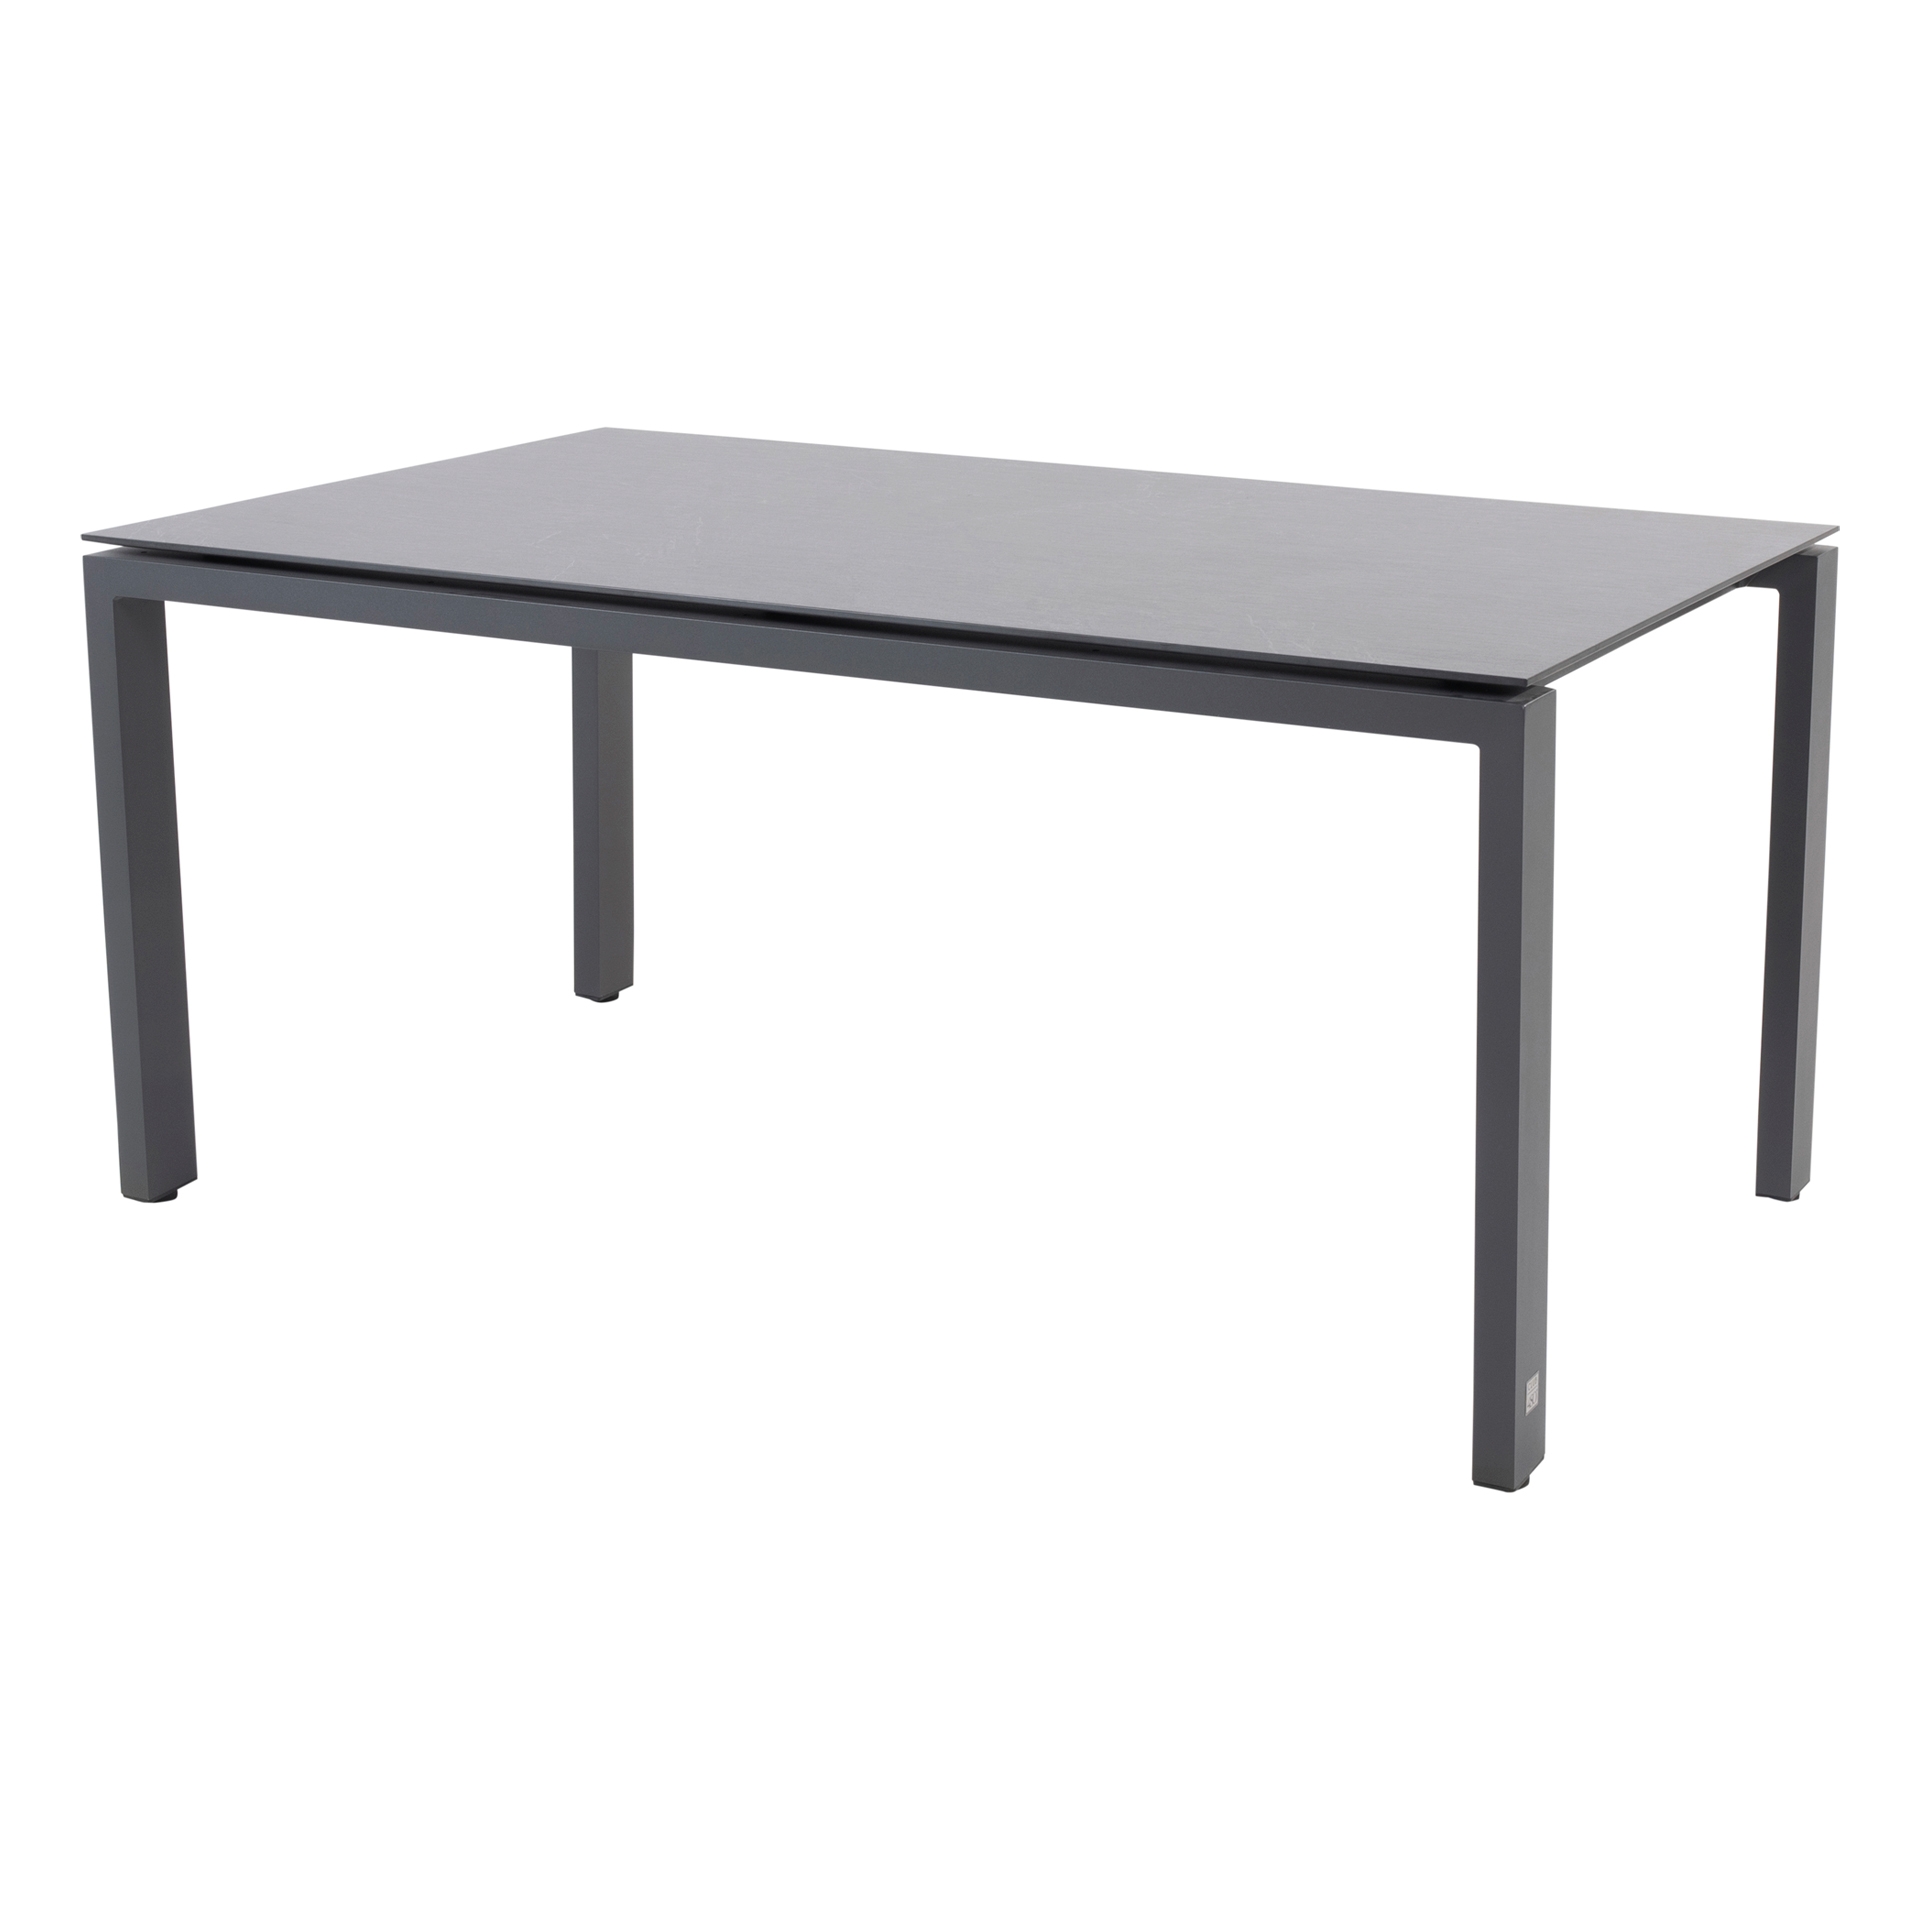 19609-19931_-Goa-dining-table-160x95cm-with-HPL-Slate-anthracite-1